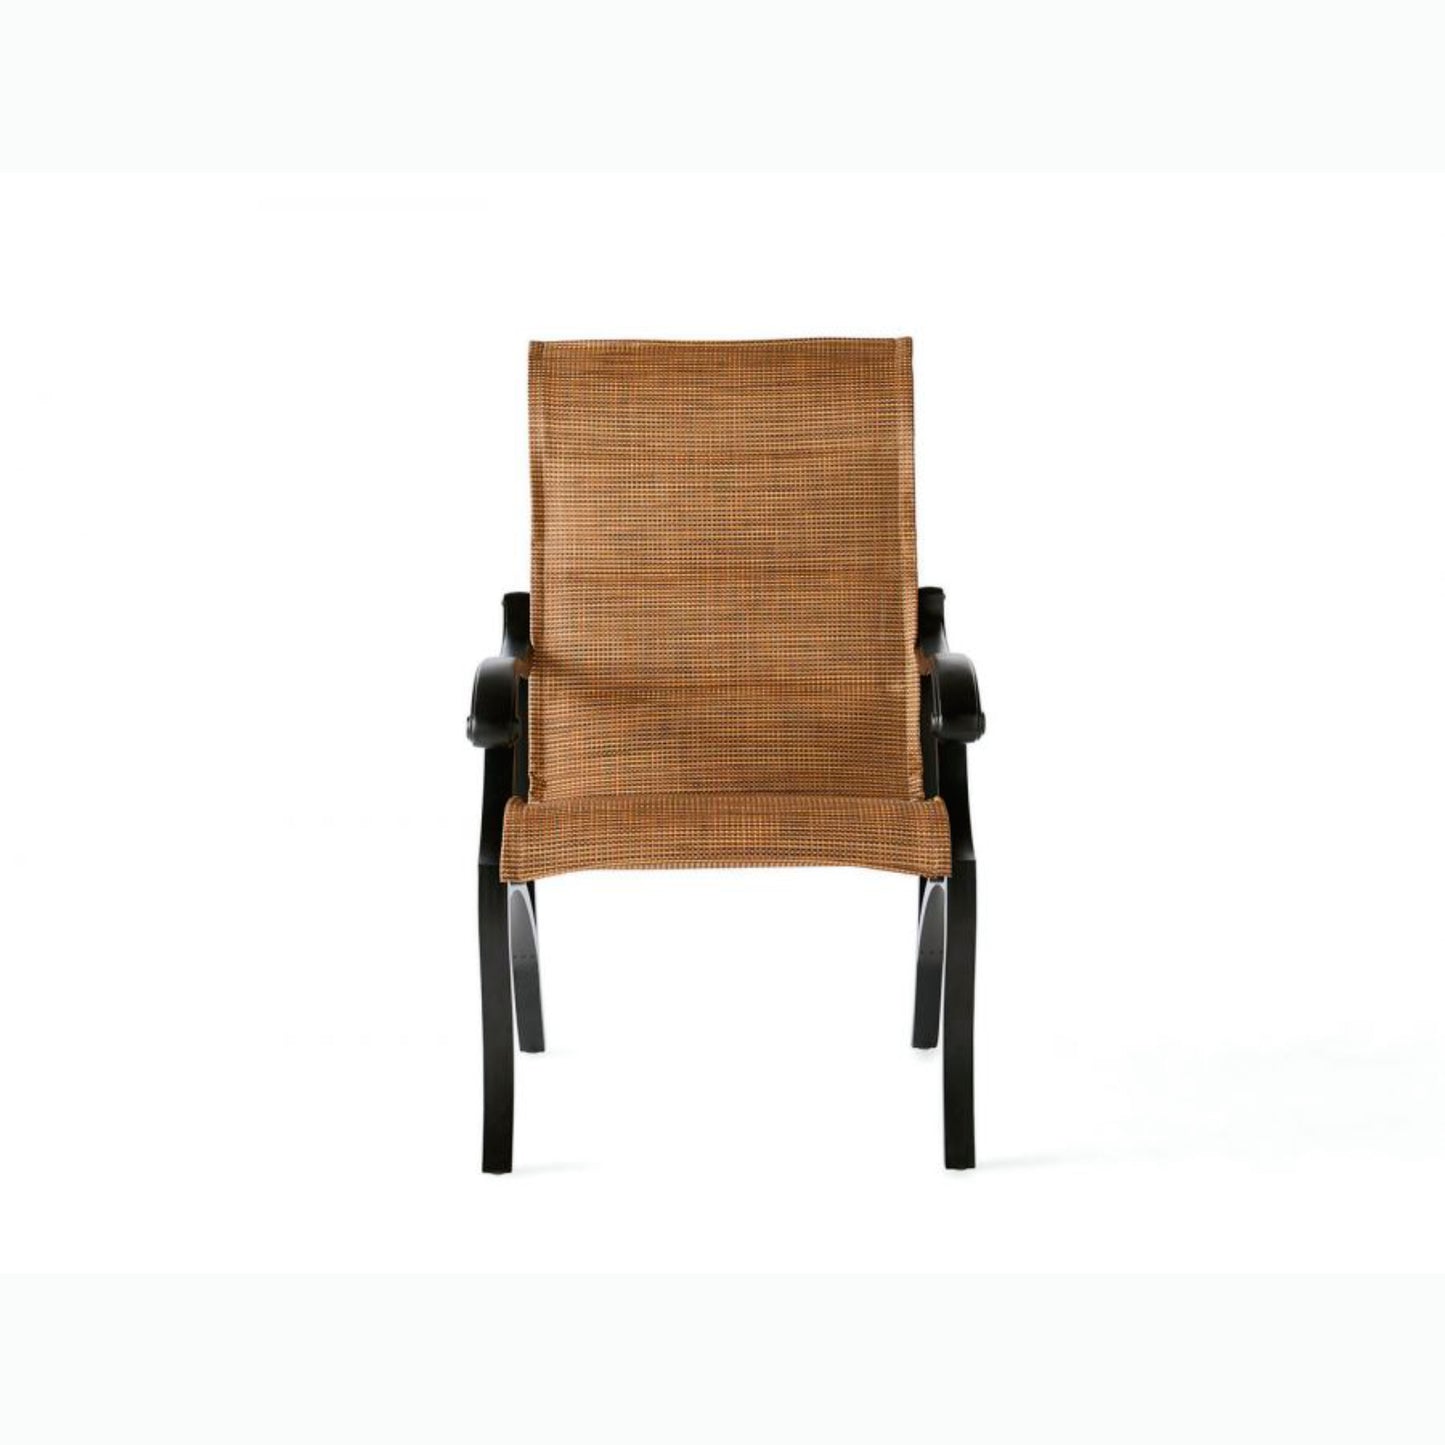 Mallin Volare Padded Sling Dining Chair VO-320 - Autumn Rust / Elevation Stone